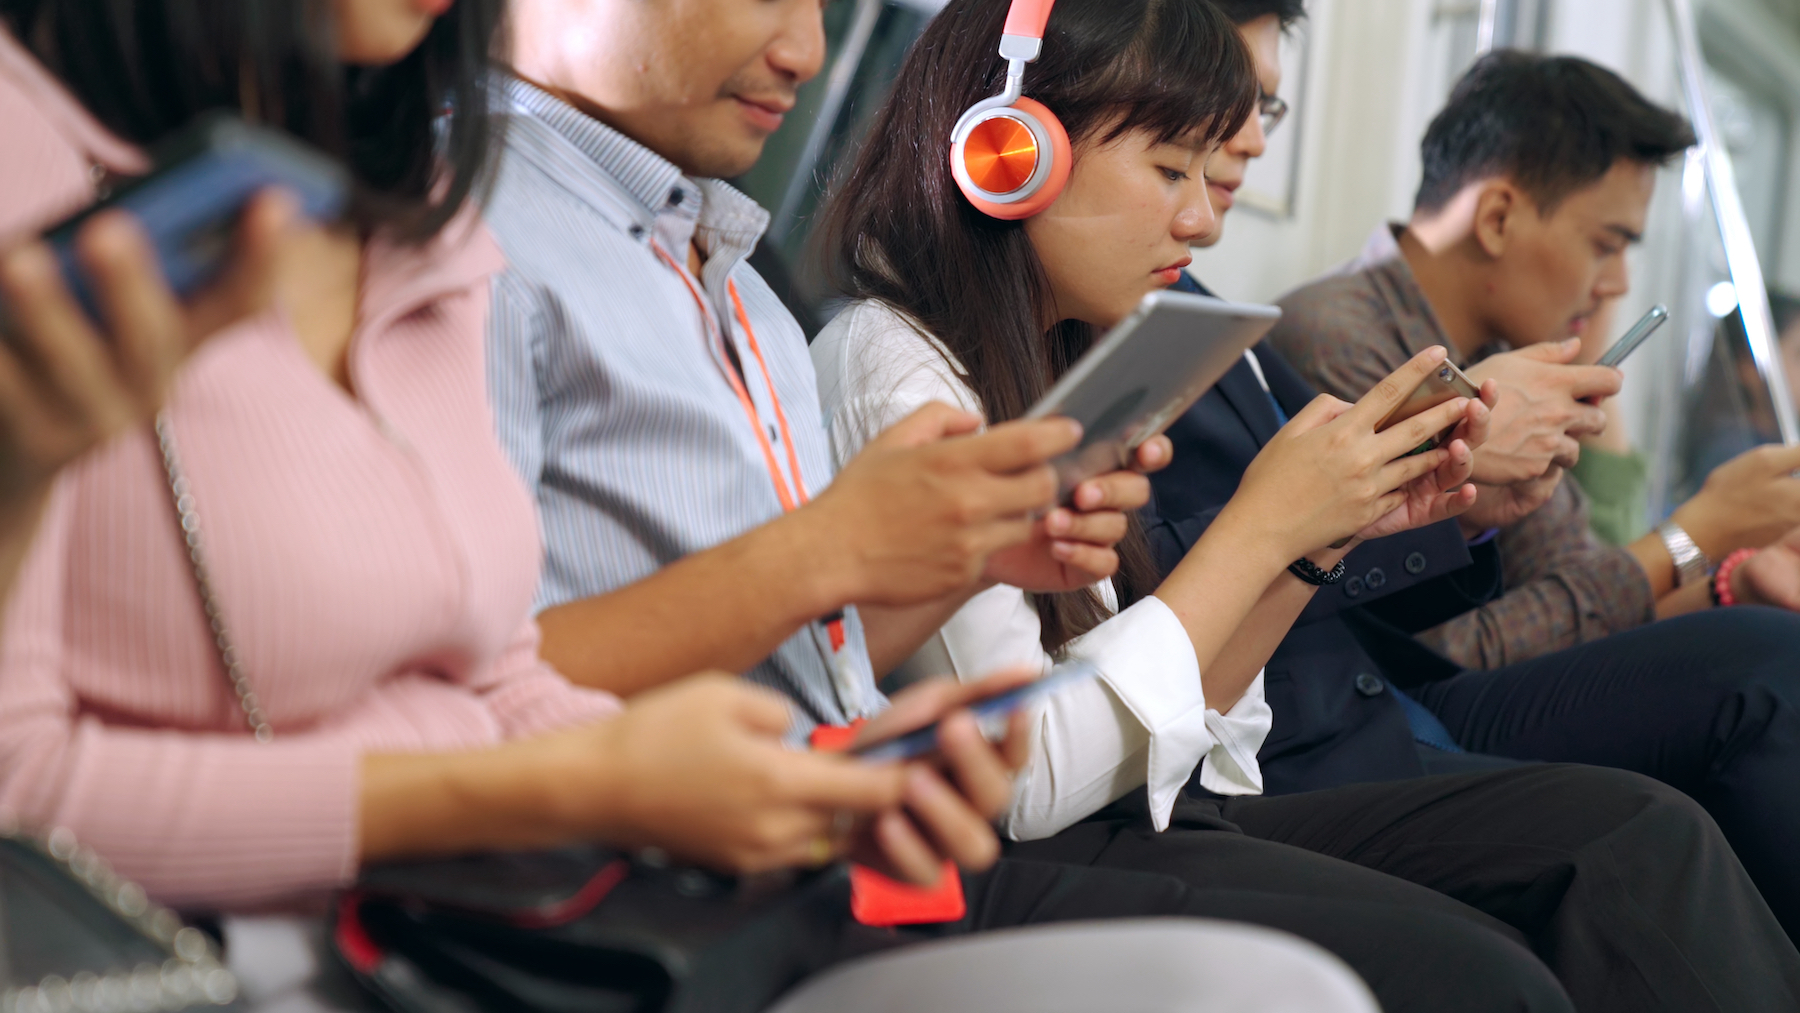 Young people on public transit look at their phones and devices